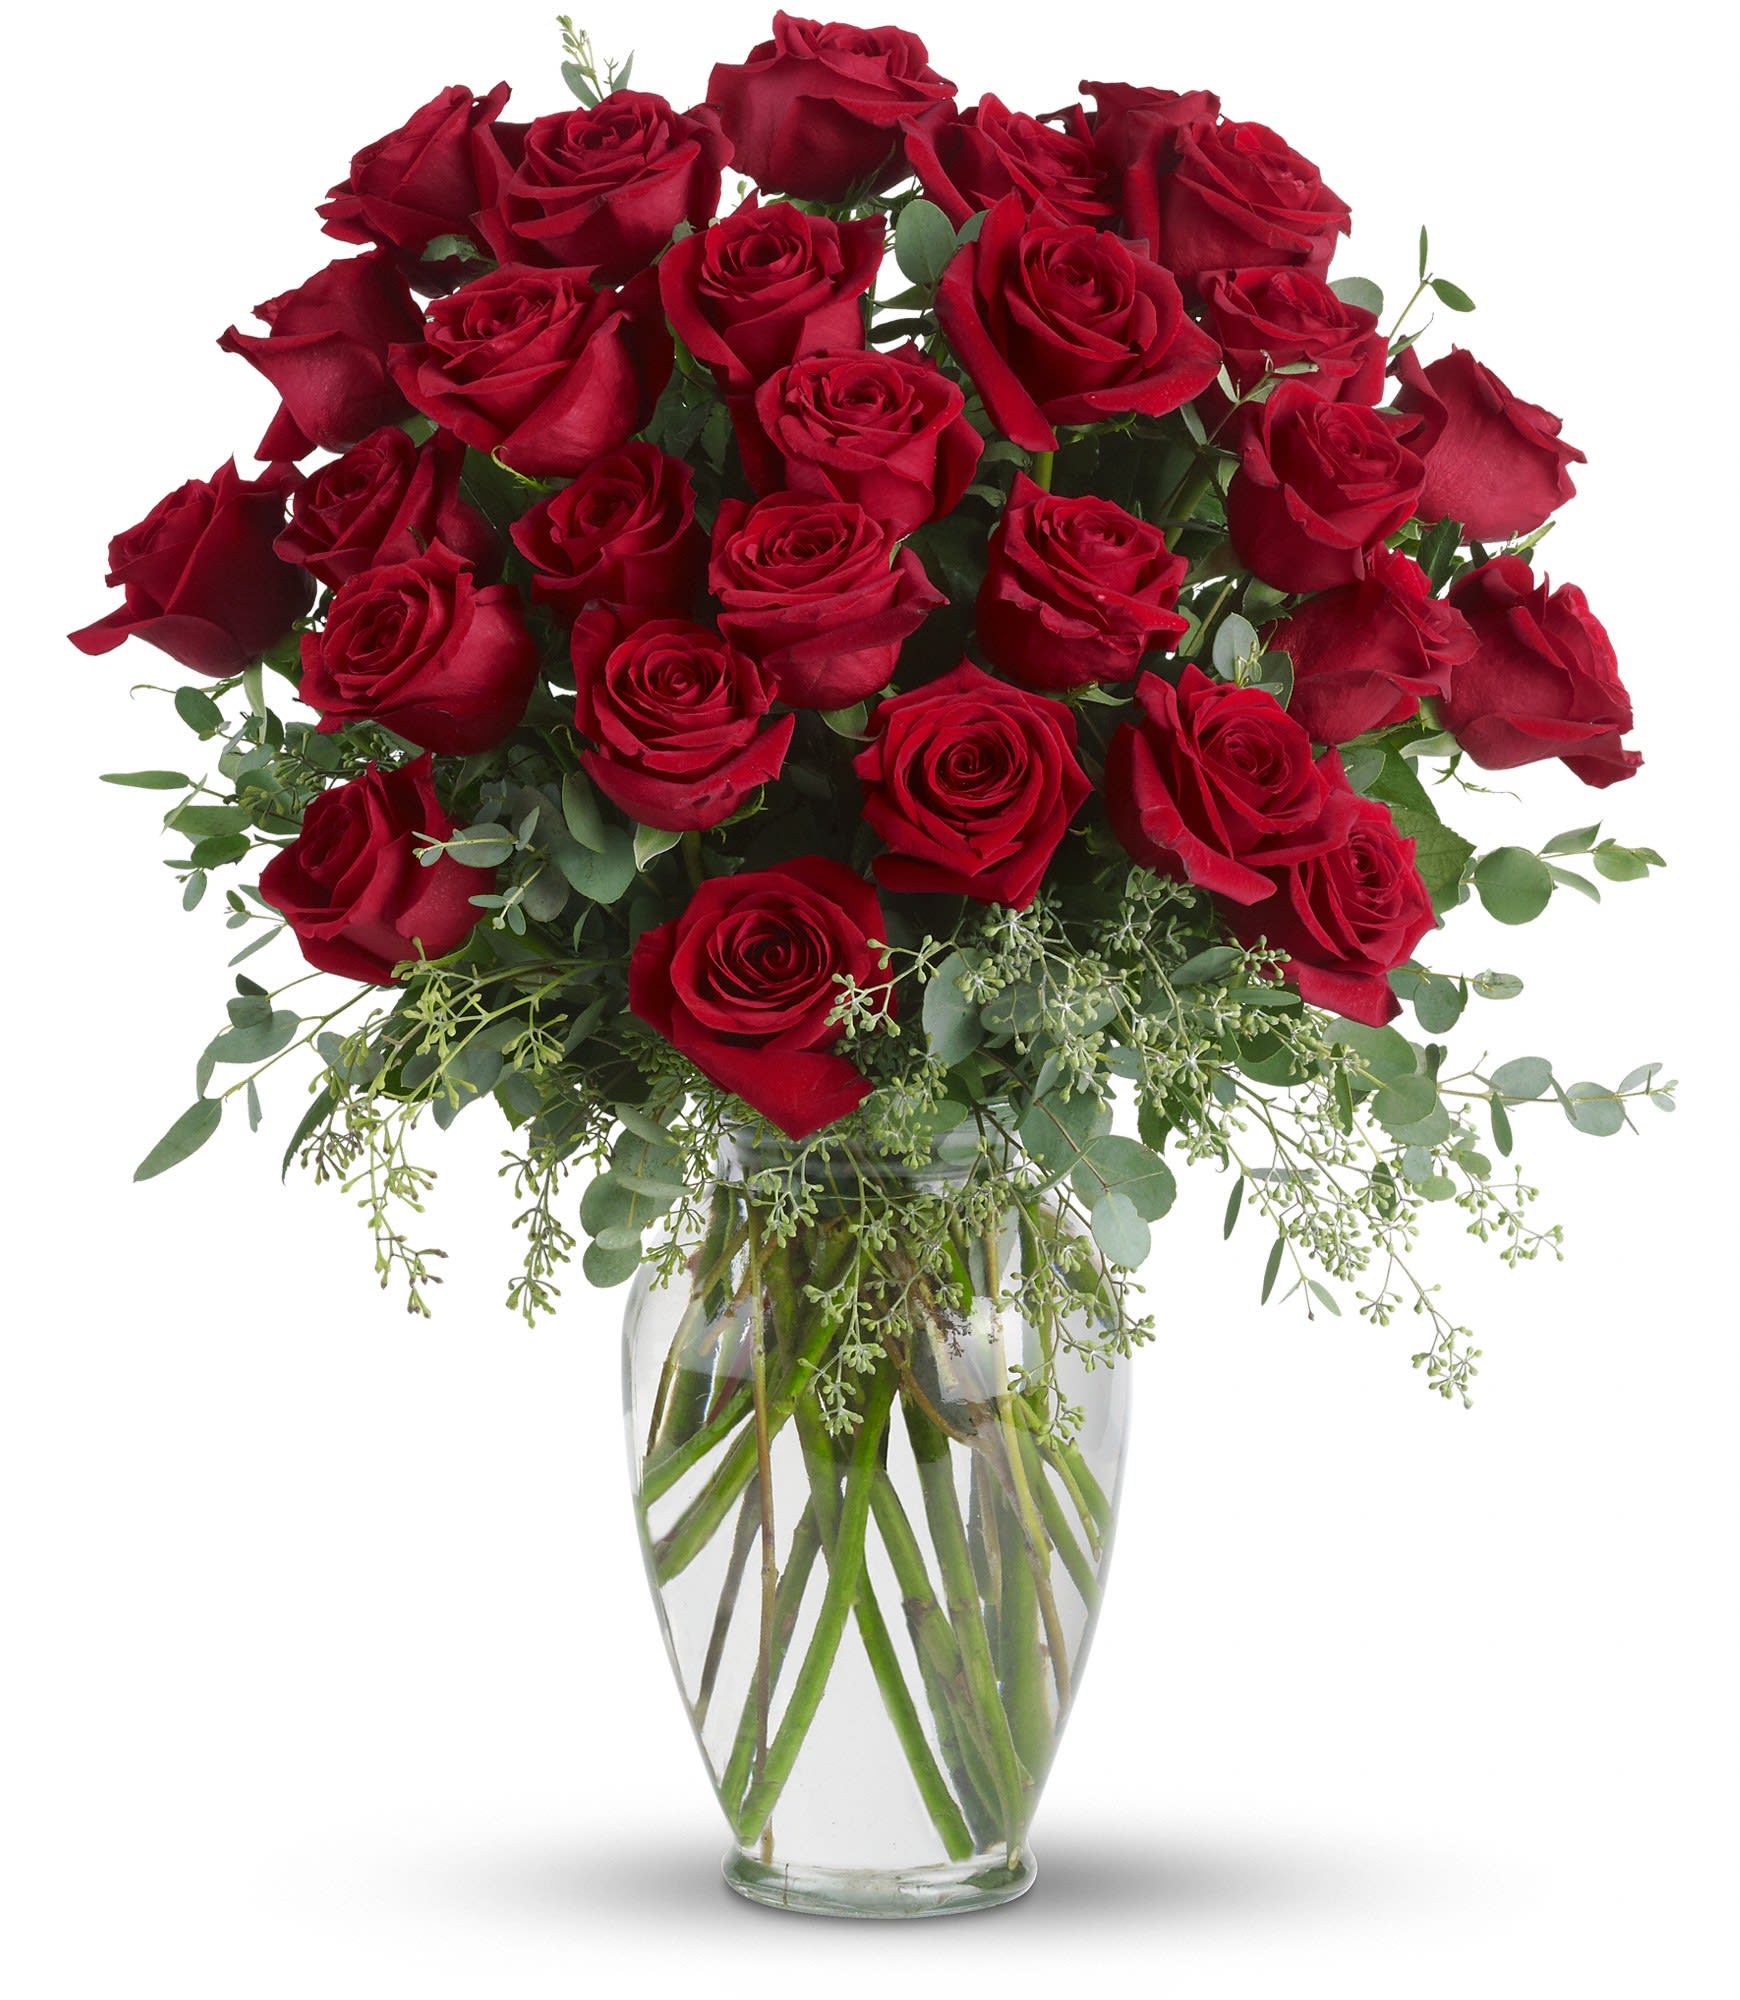 Forever Beloved - 30 Long Stemmed Roses by Teleflora - Forever beloved. Forever in your heart. Forever close to you. That is what this beautiful rose arrangement symbolizes. A shared life. Or a shared sacred moment. All will be dignified beautifully with this loving gift of roses in a classic urn. 